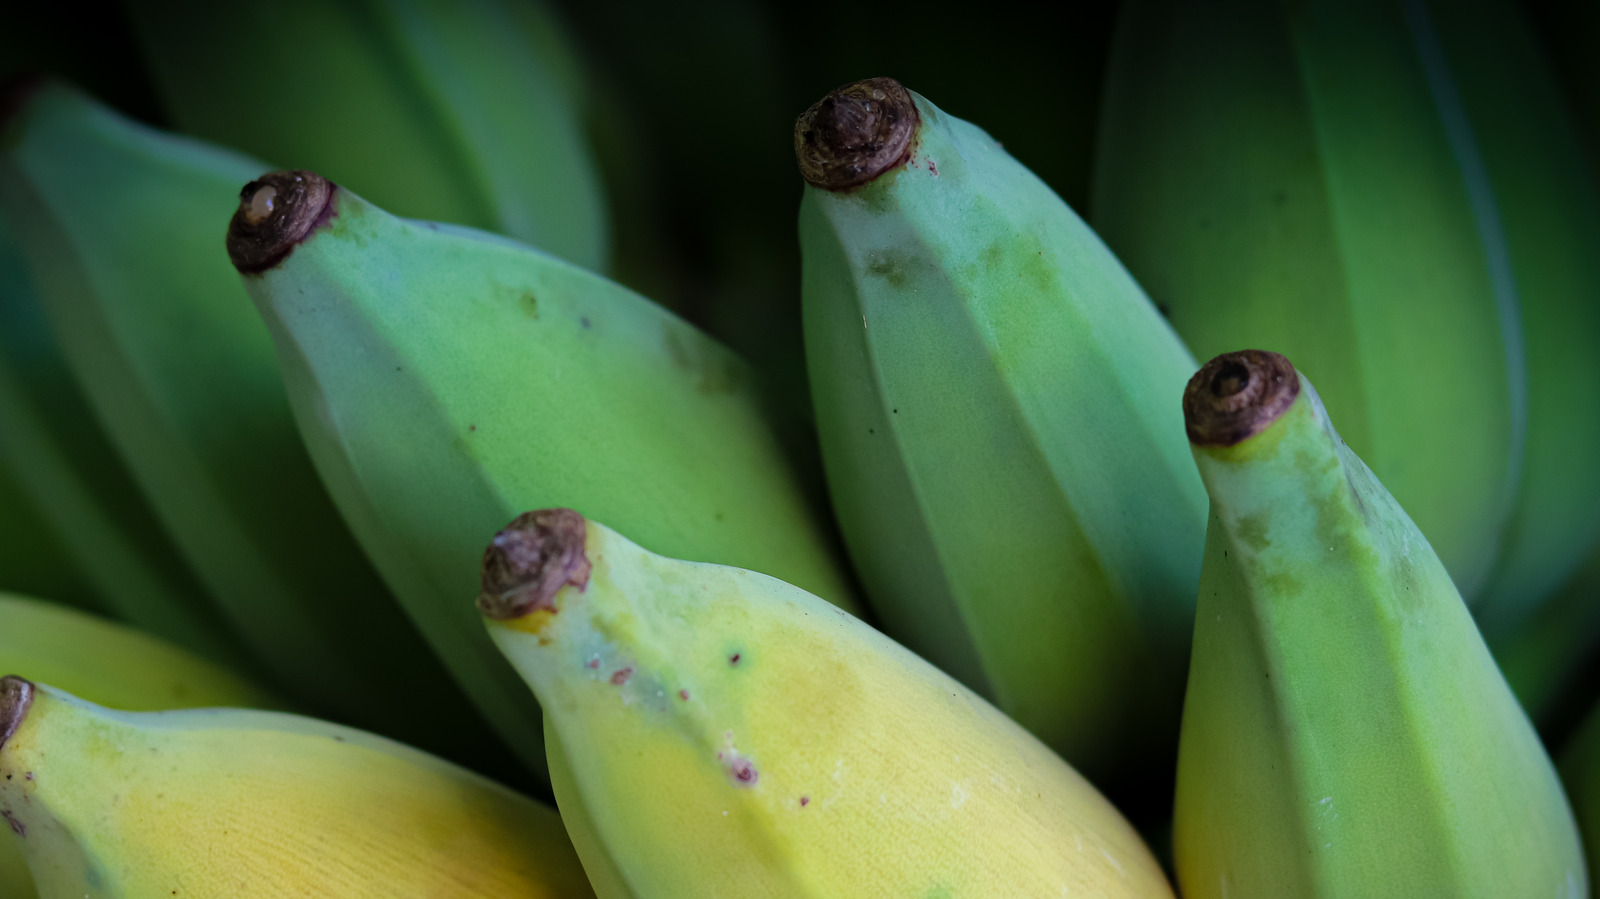 Fact check: Blue Java bananas are not bright blue